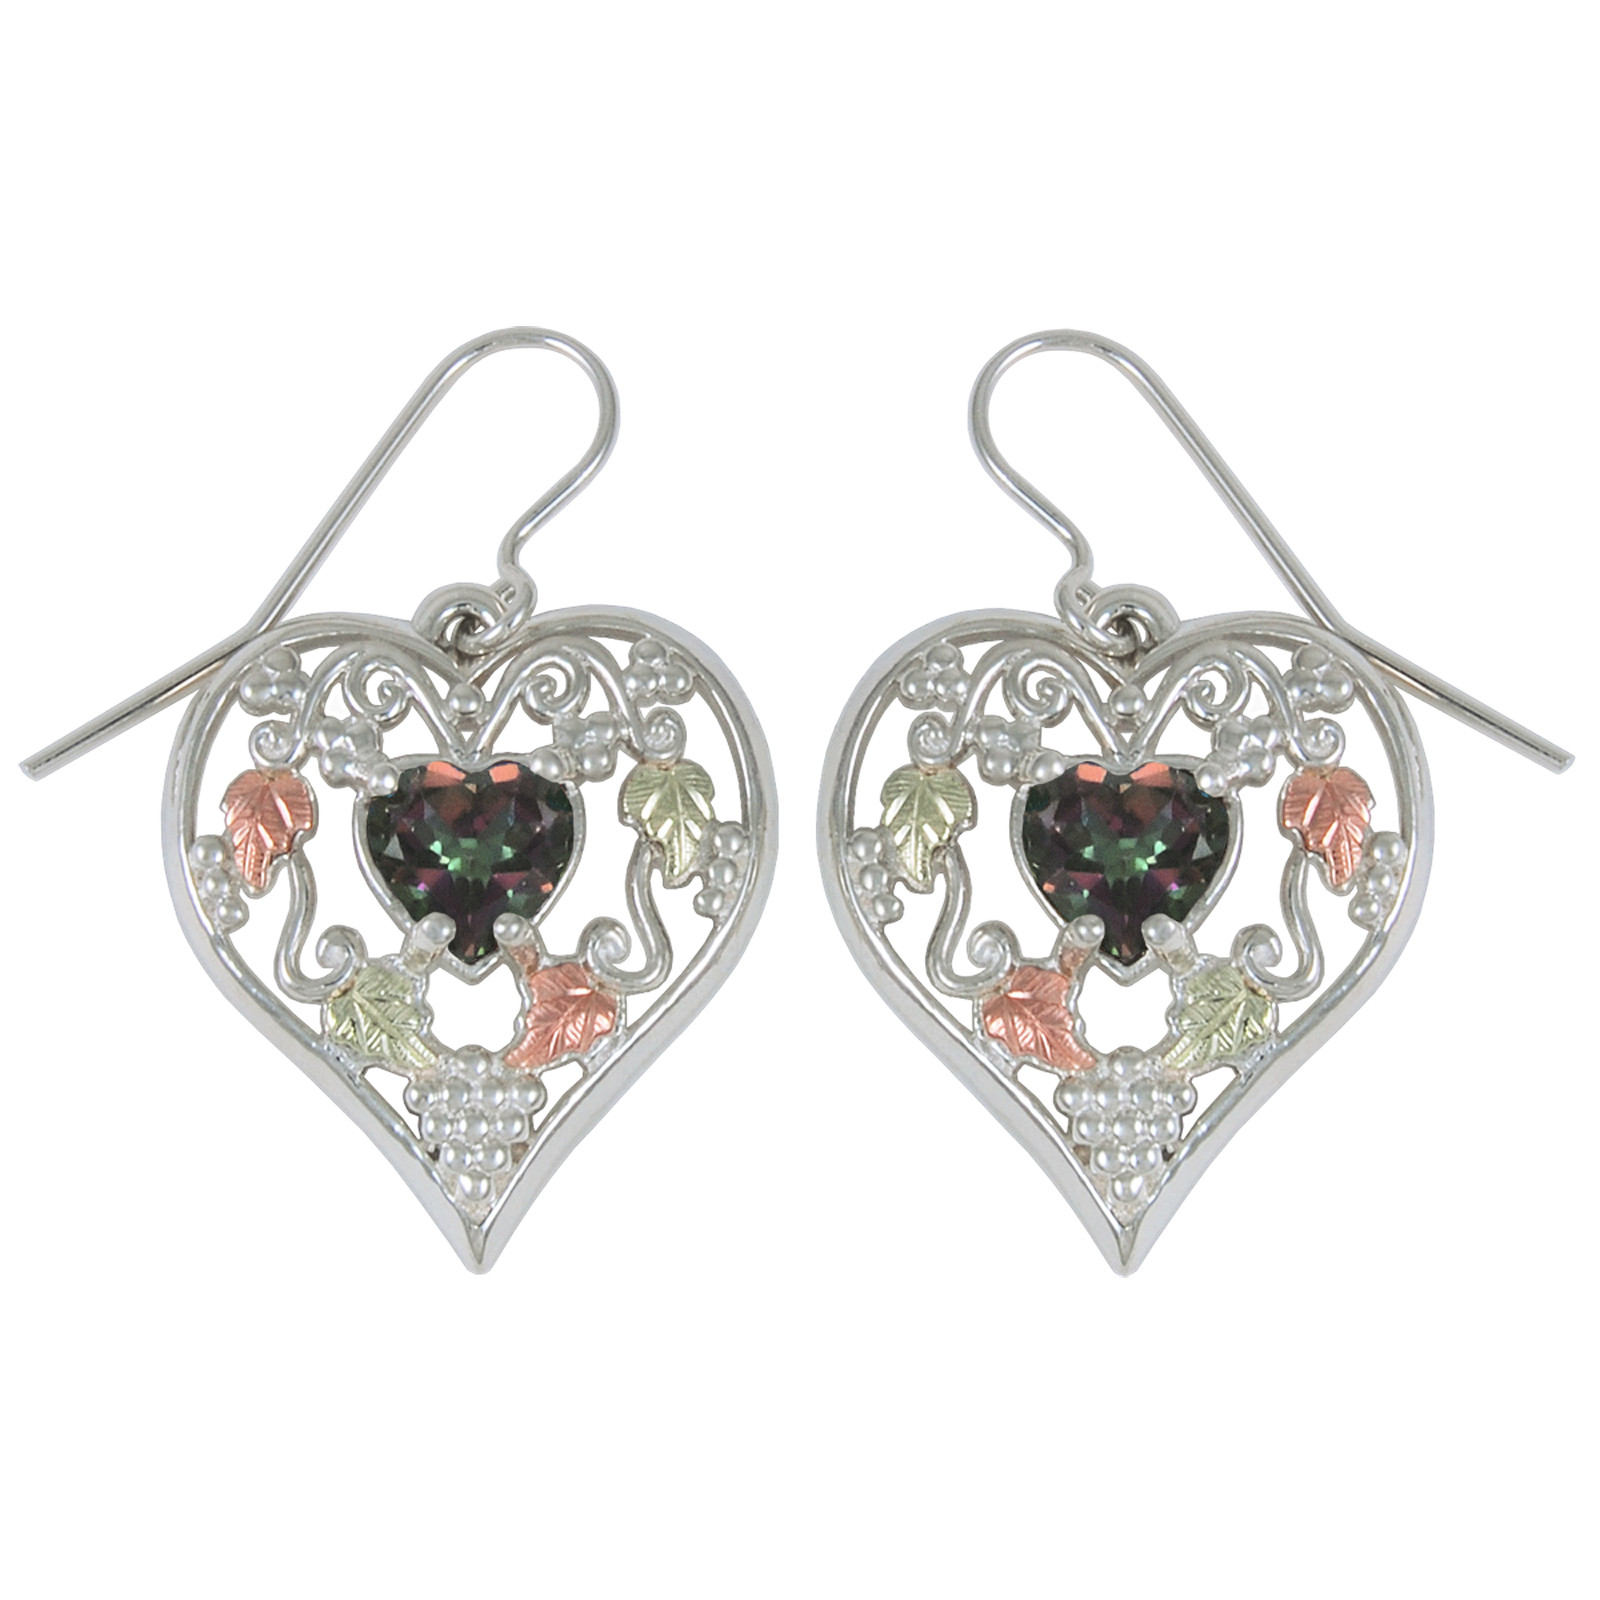 Mystic Fire Topaz Earrings
 Black Hills Gold Sterling Silver and 12k Gold Mystic Fire